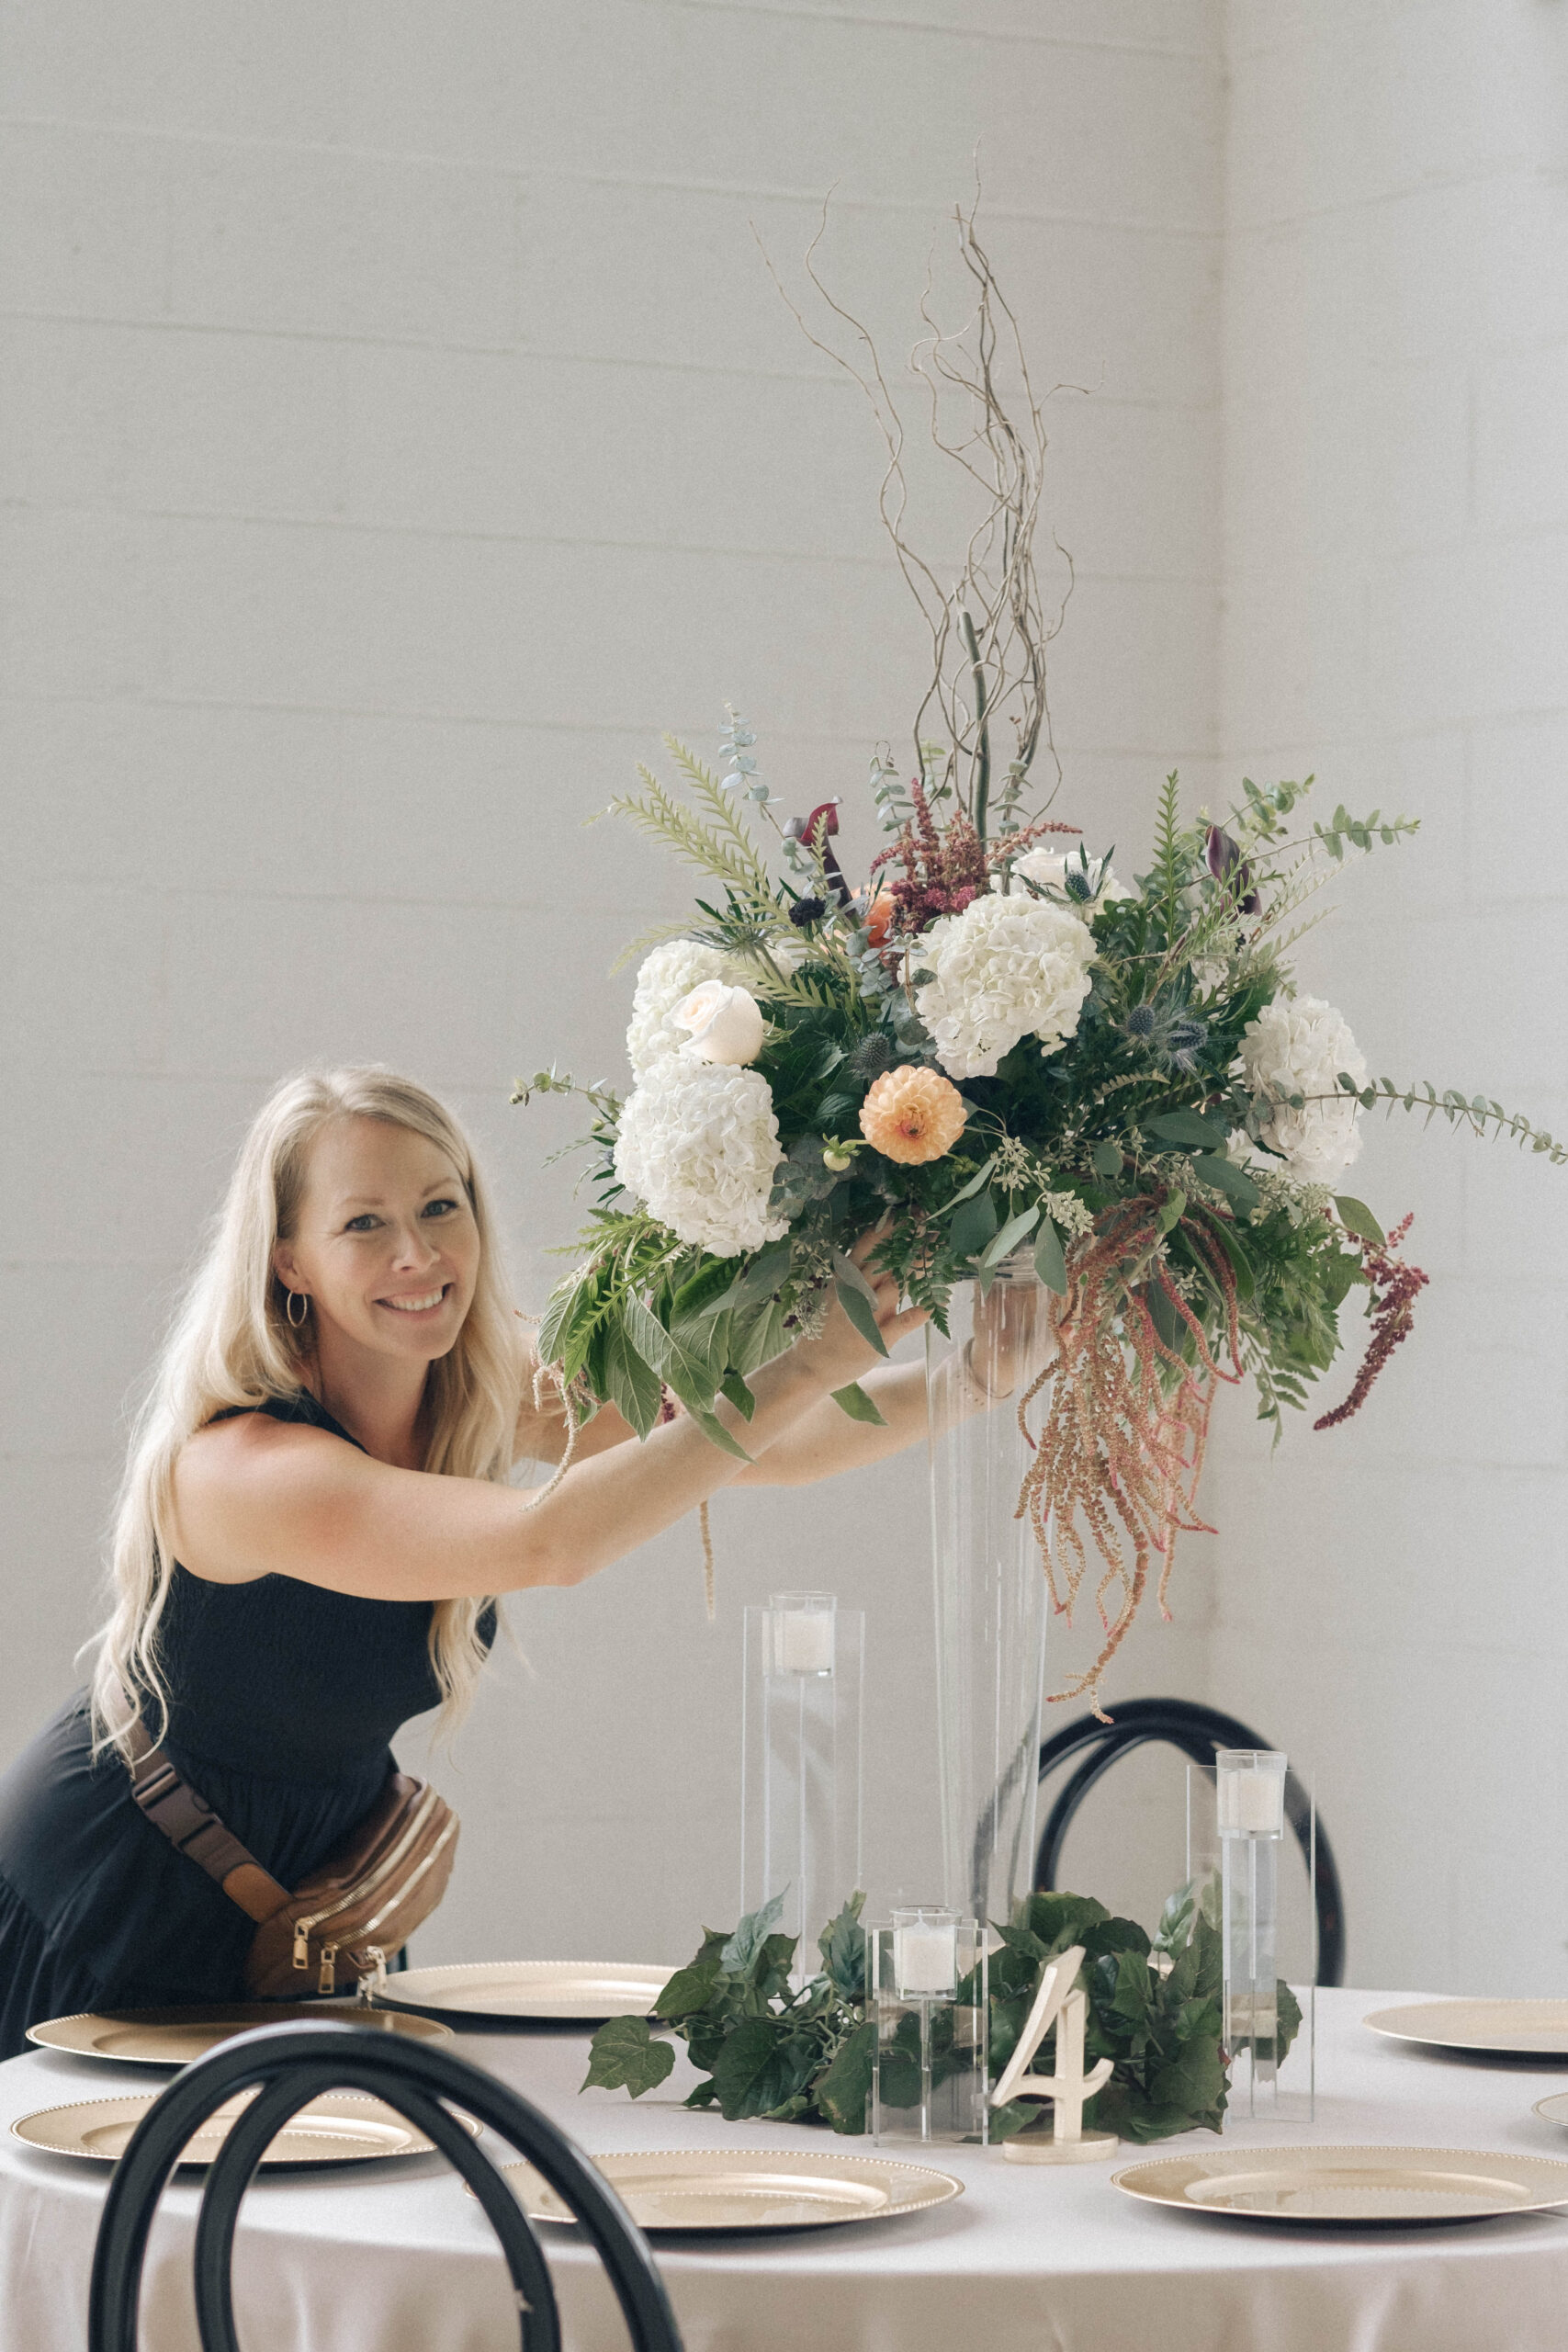 A photo of a woman setting up a table centerpiece for a wedding.